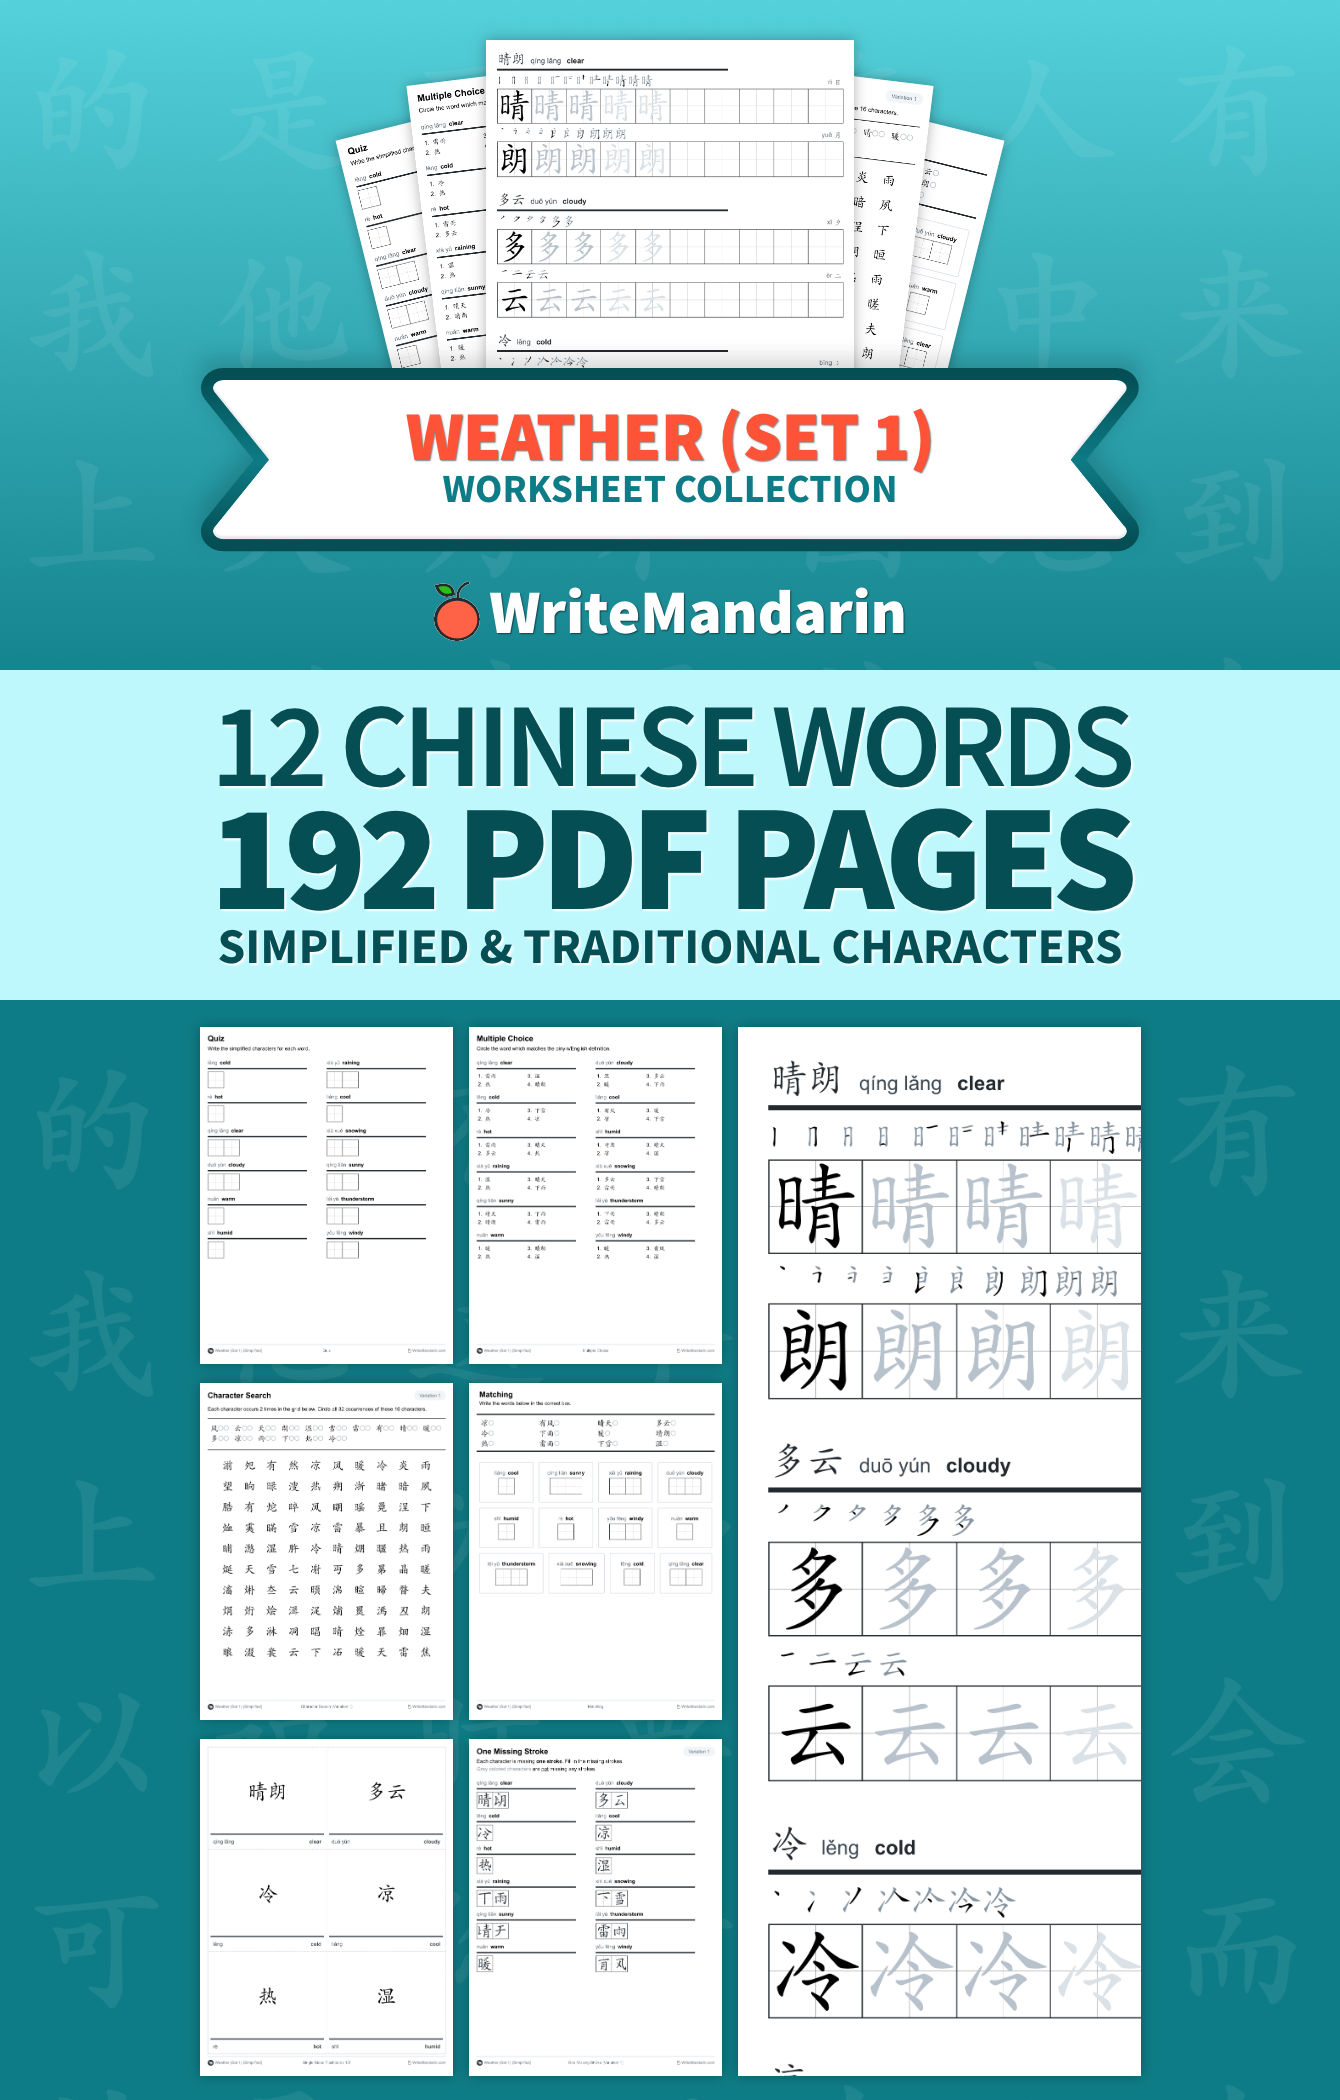 Preview image of Weather (Set 1) worksheet collection